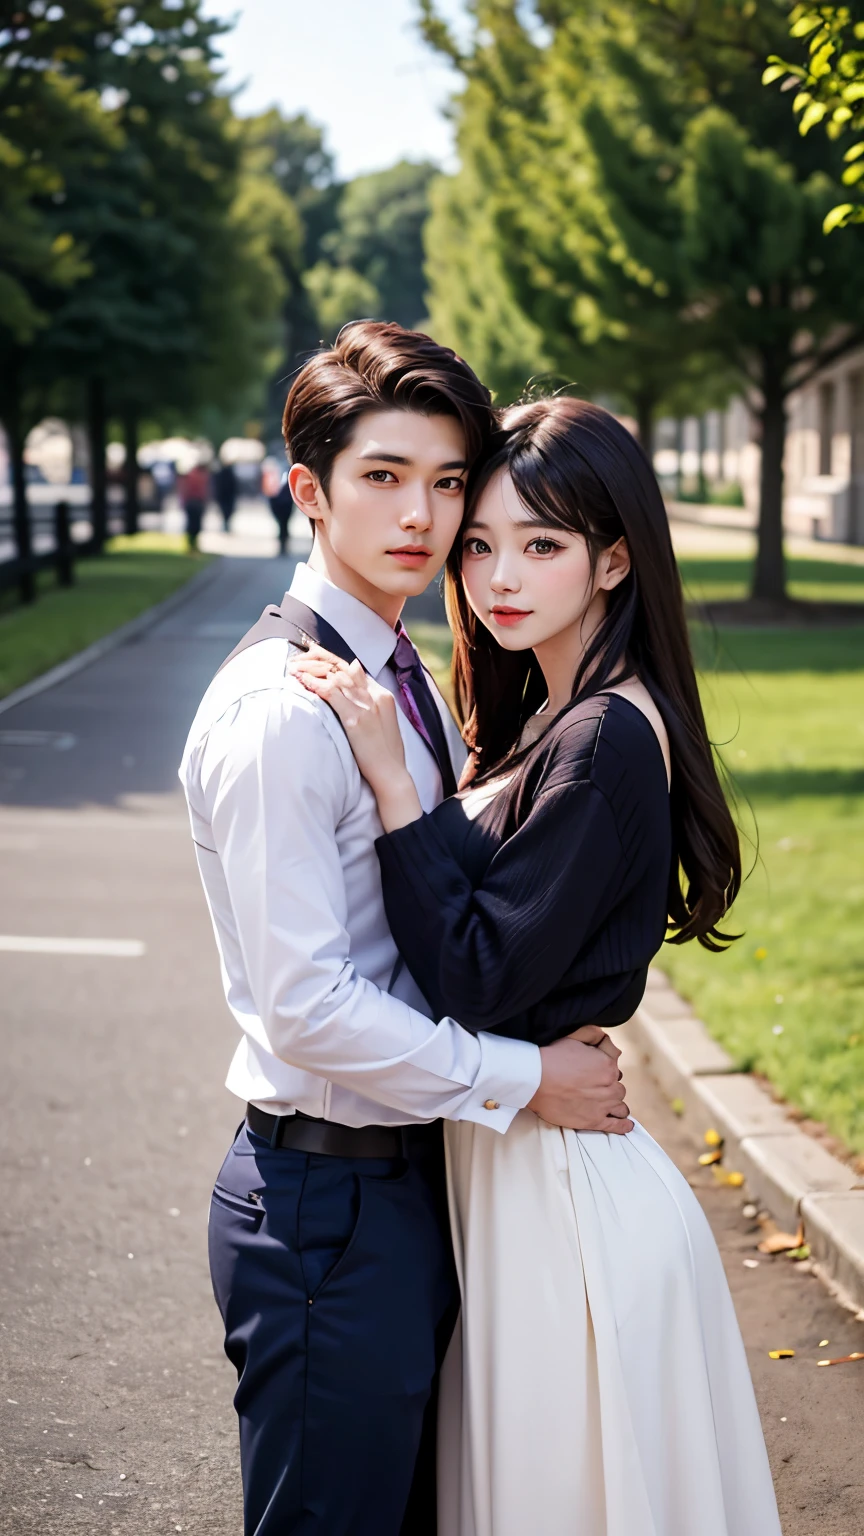 Couple hugging in the park、Handsome Men and Beautiful Women